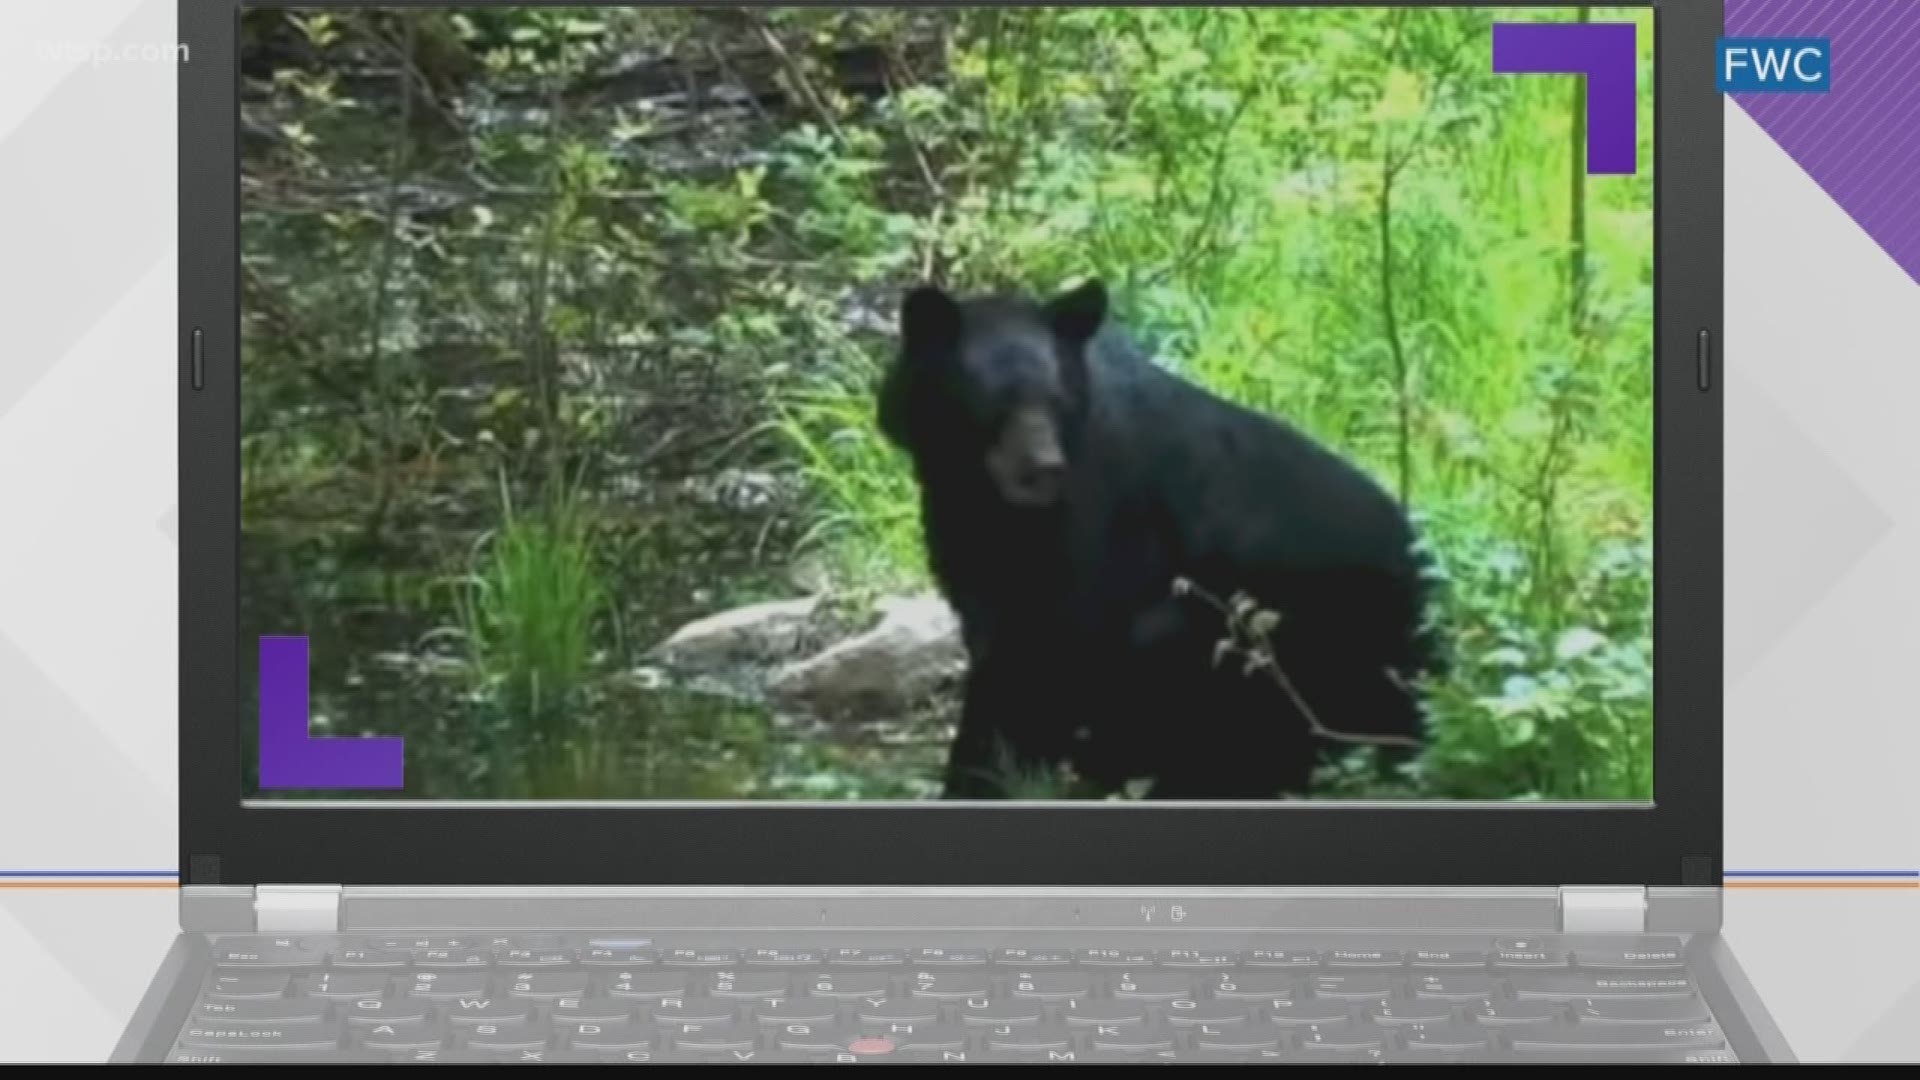 The Polk County Sheriff's Office said it's already received two reports of black bears in the area.

June is the start of black bear mating season in Florida, and the sheriff's office and Florida Fish and Wildlife Conservation Commission issued a reminder about not interacting with these animals.

The sheriff's office said a black bear was reported near the airport in Lakeland and another was spotted near Drane Field Road. 

The FWC reminded residents that black bear sightings this time of year are not uncommon because young bears are leaving the family unit. June is also the start of the black bear mating season when the animals can travel farther to look for a mate.

The FWC said residents should secure outside "attractants" like garbage, pet food and birdseed to keep bears away from homes. Wildlife officials said you should never approach a bear if you see one, and to keep a safe distance.

"If you do encounter a bear at close range, do not run," the FWC said. "Remain standing upright, speak to the bear in a calm, assertive voice, and back up slowly while leaving the bear with a clear escape route.” 

Florida black bears are the only bear species in the state. These animals prefer habitats like forested wetlands, natural pinelands, hammocks, scrub and shrub lands. The FWC said bears will also congregate in areas with a lot of food, including human food.

If you spot a black bear, the sheriff's office and FWC ask you to call the Southwest Regional Office at 863-648-3200.